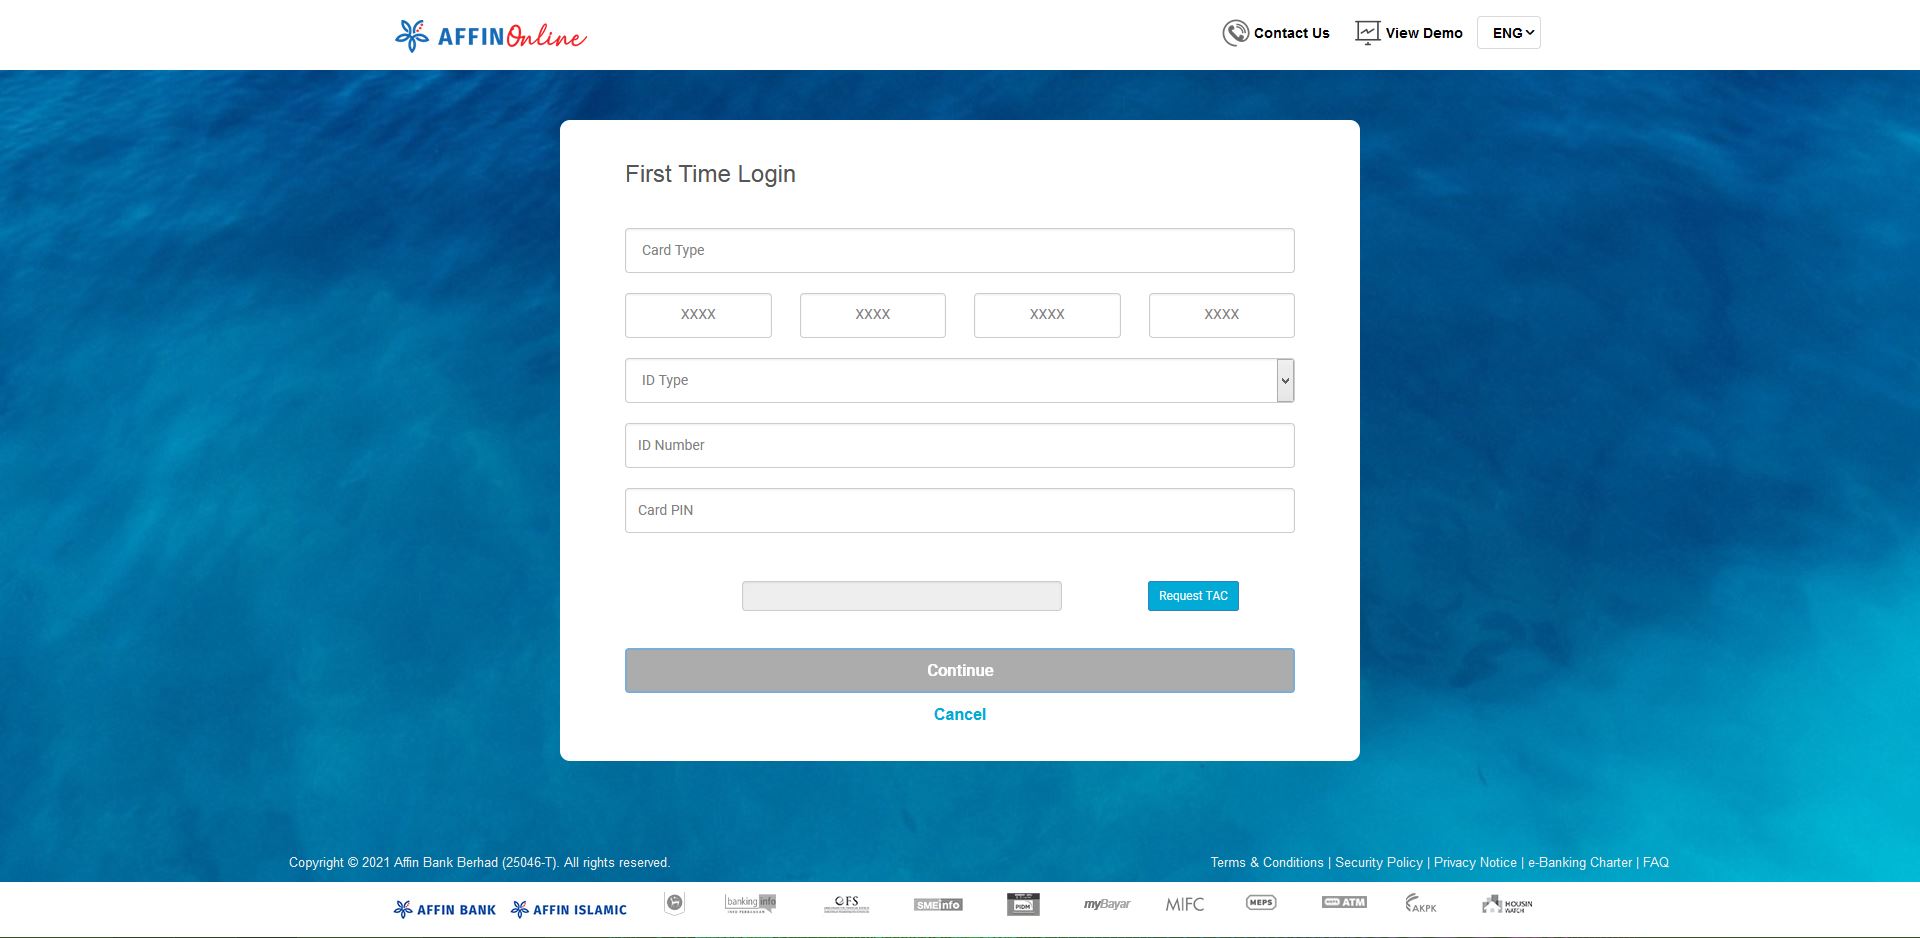 How to Login First Time in Affin Bank Online Banking using AffinOnline Page